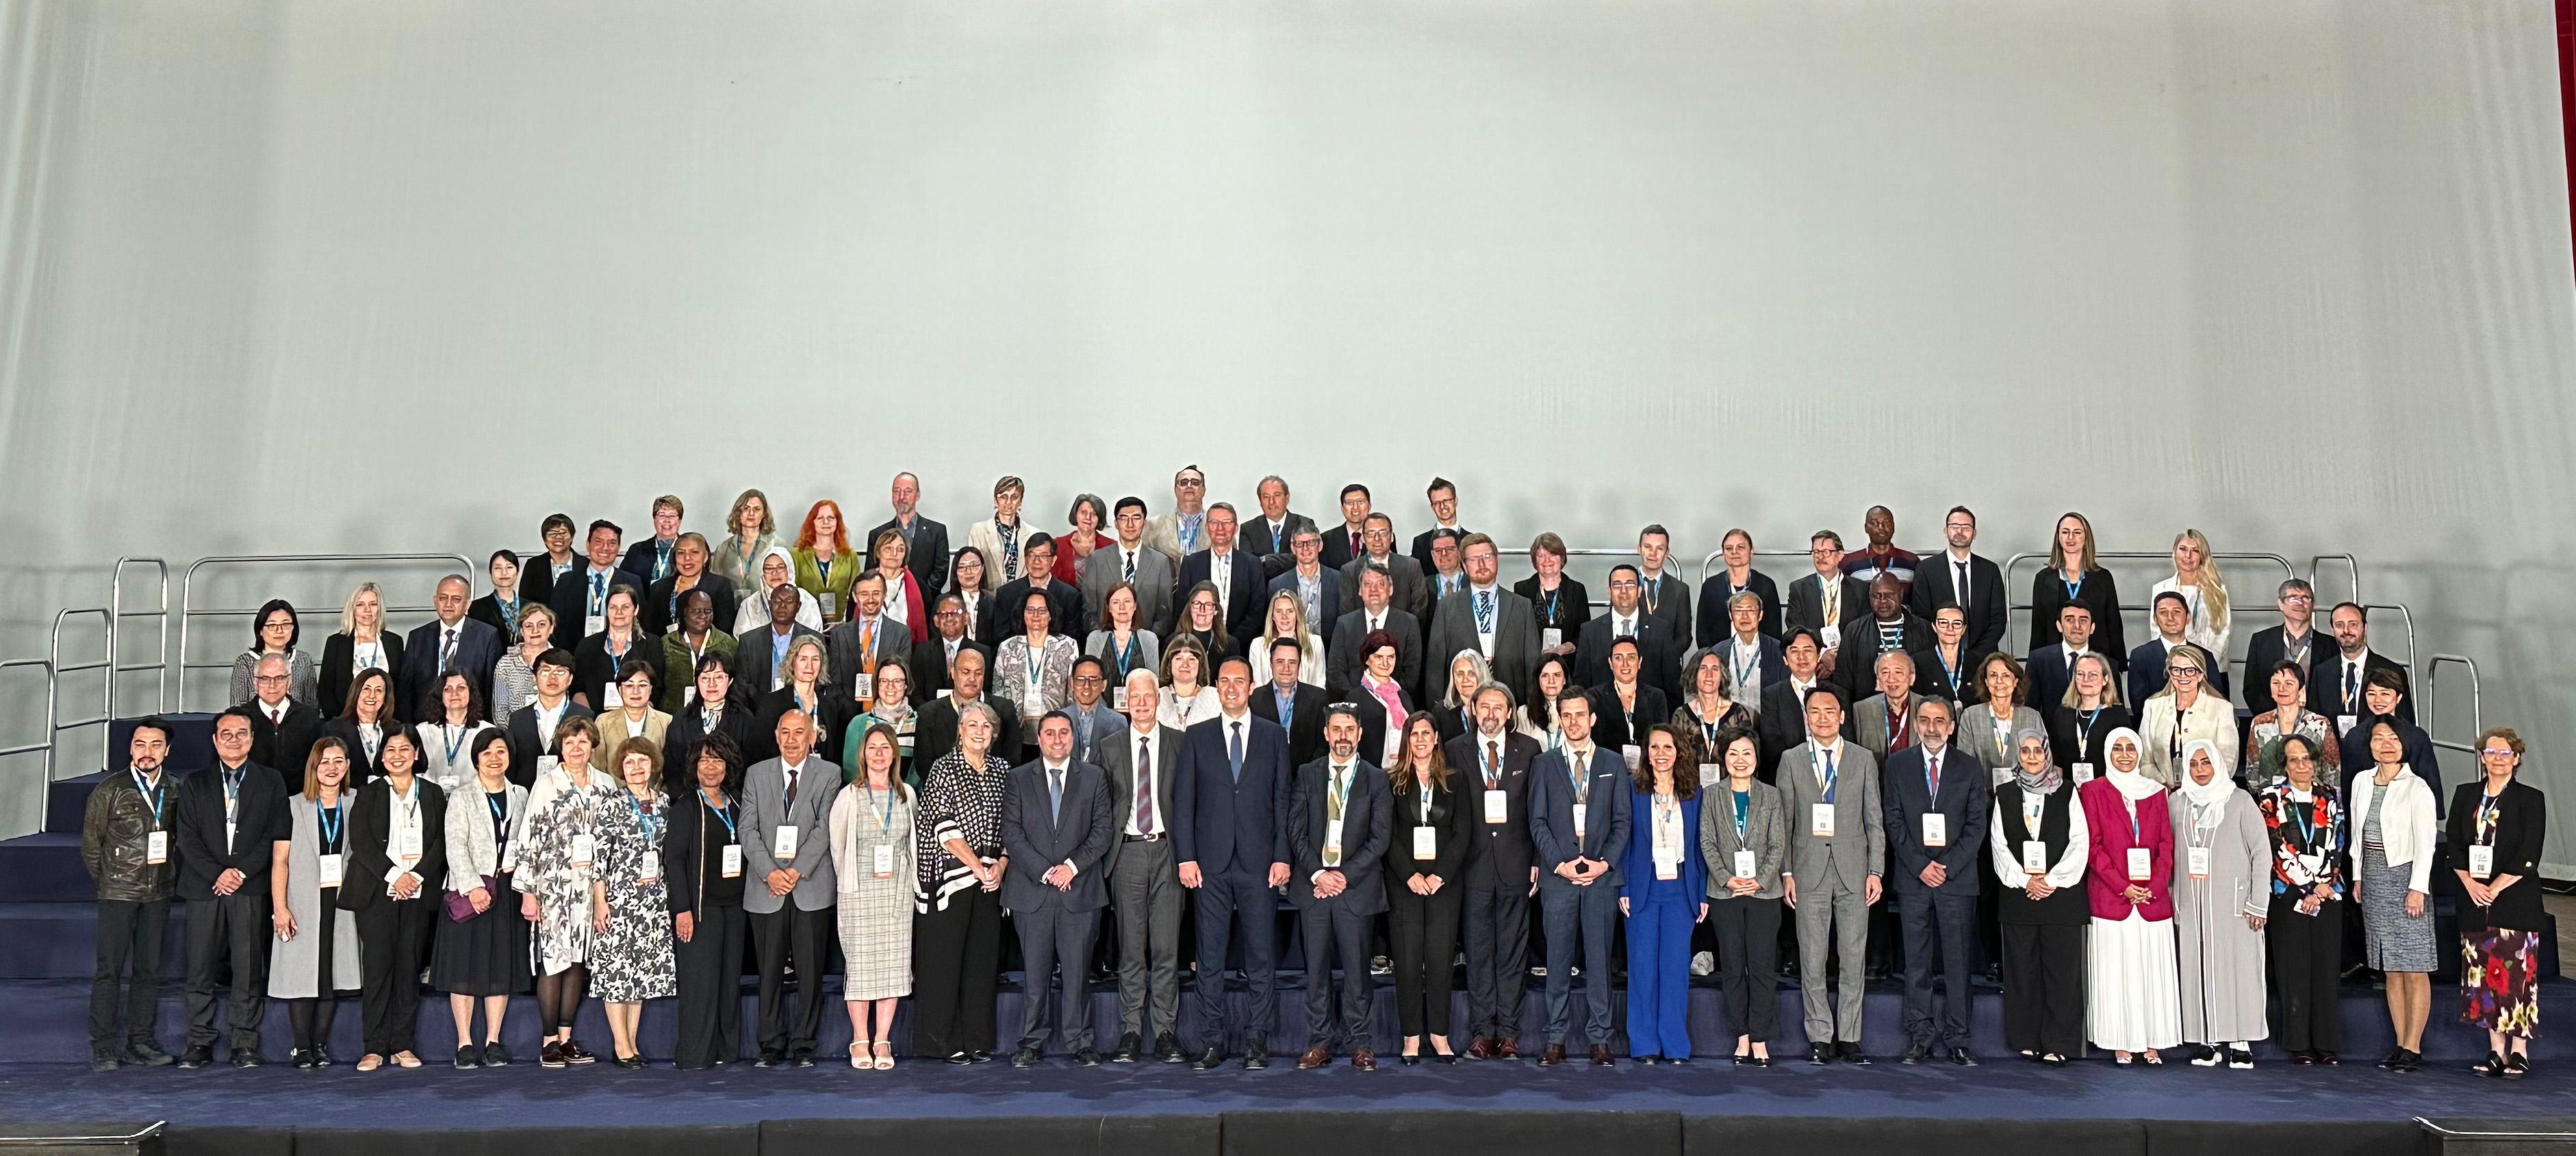 The Secretary for Education, Dr Choi Yuk-lin, attended the Programme for International Student Assessment Governing Board Meeting organised by the Organisation for Economic Co-operation and Development in Malta from April 17 to 19 (Malta time). Photo shows Dr Choi (front row, ninth right) and representatives from other regions.